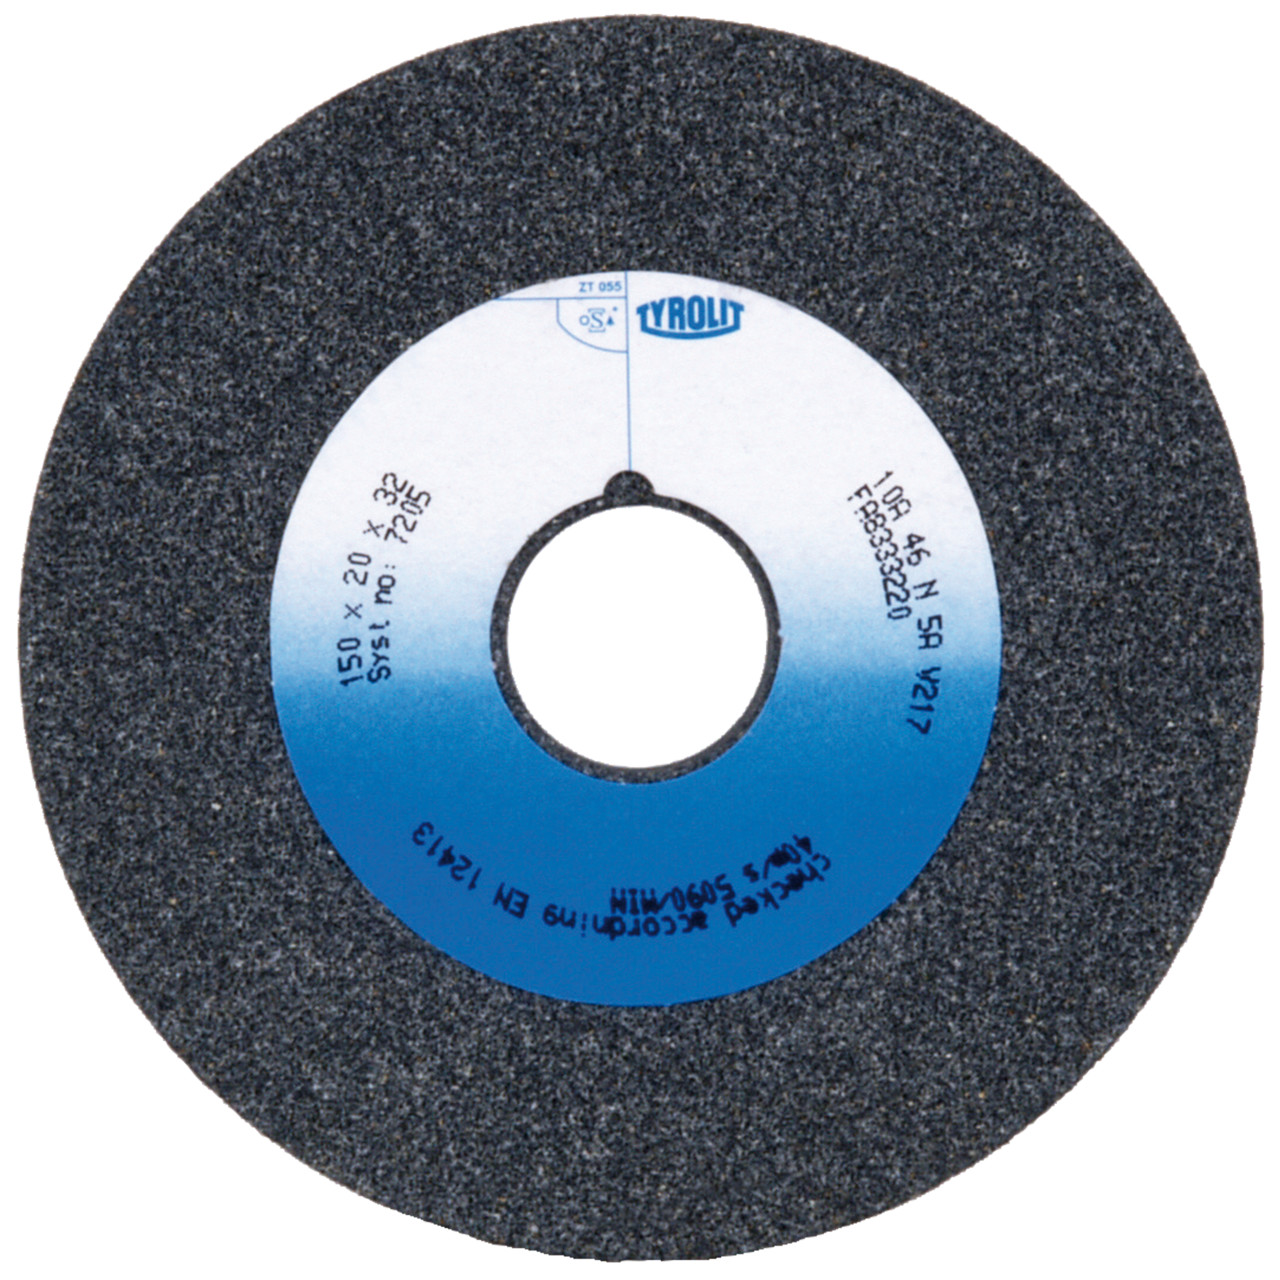 Tyrolit Conventional ceramic grinding discs DxDxH 175x25x32 For unalloyed and low-alloy steels, shape: 1, Art. 147600